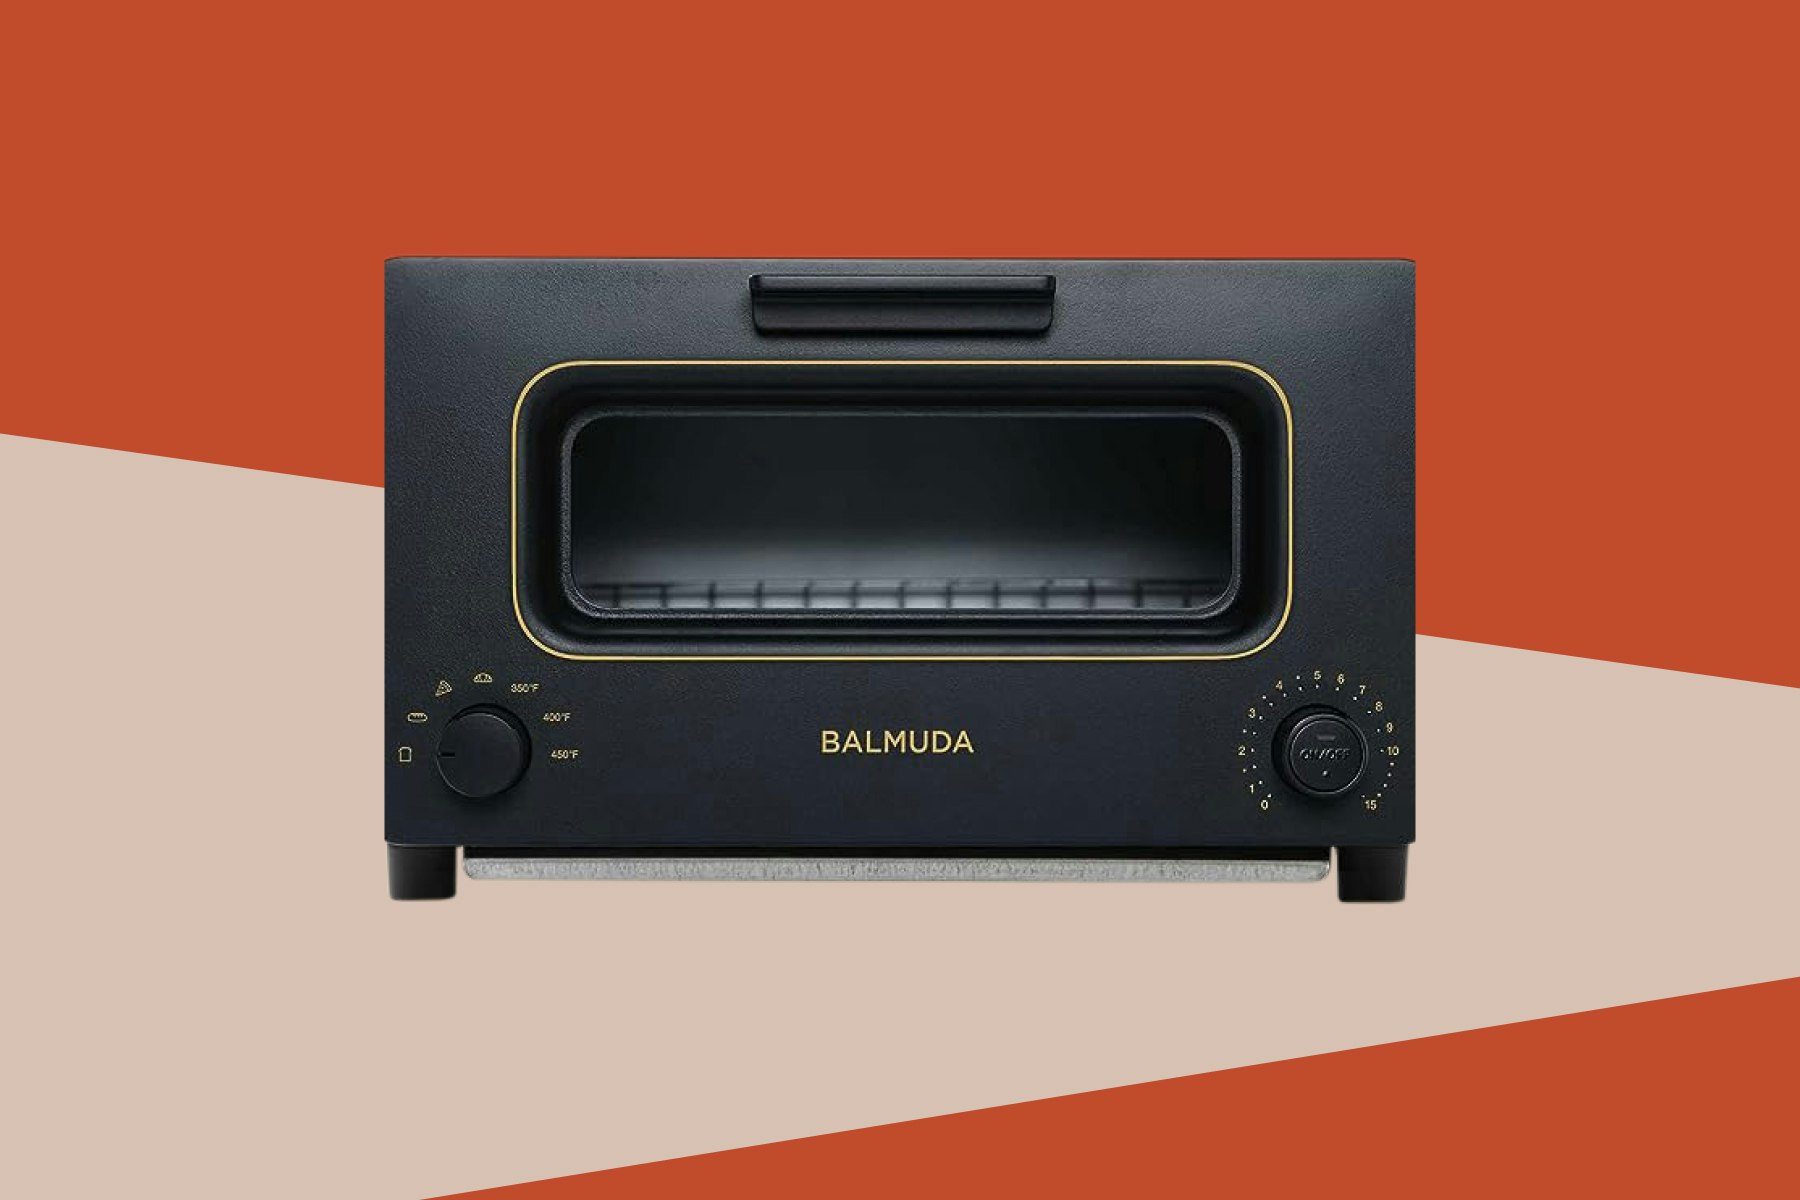 Balmuda the Toaster review: It's worth the hype if you have $300 to spend